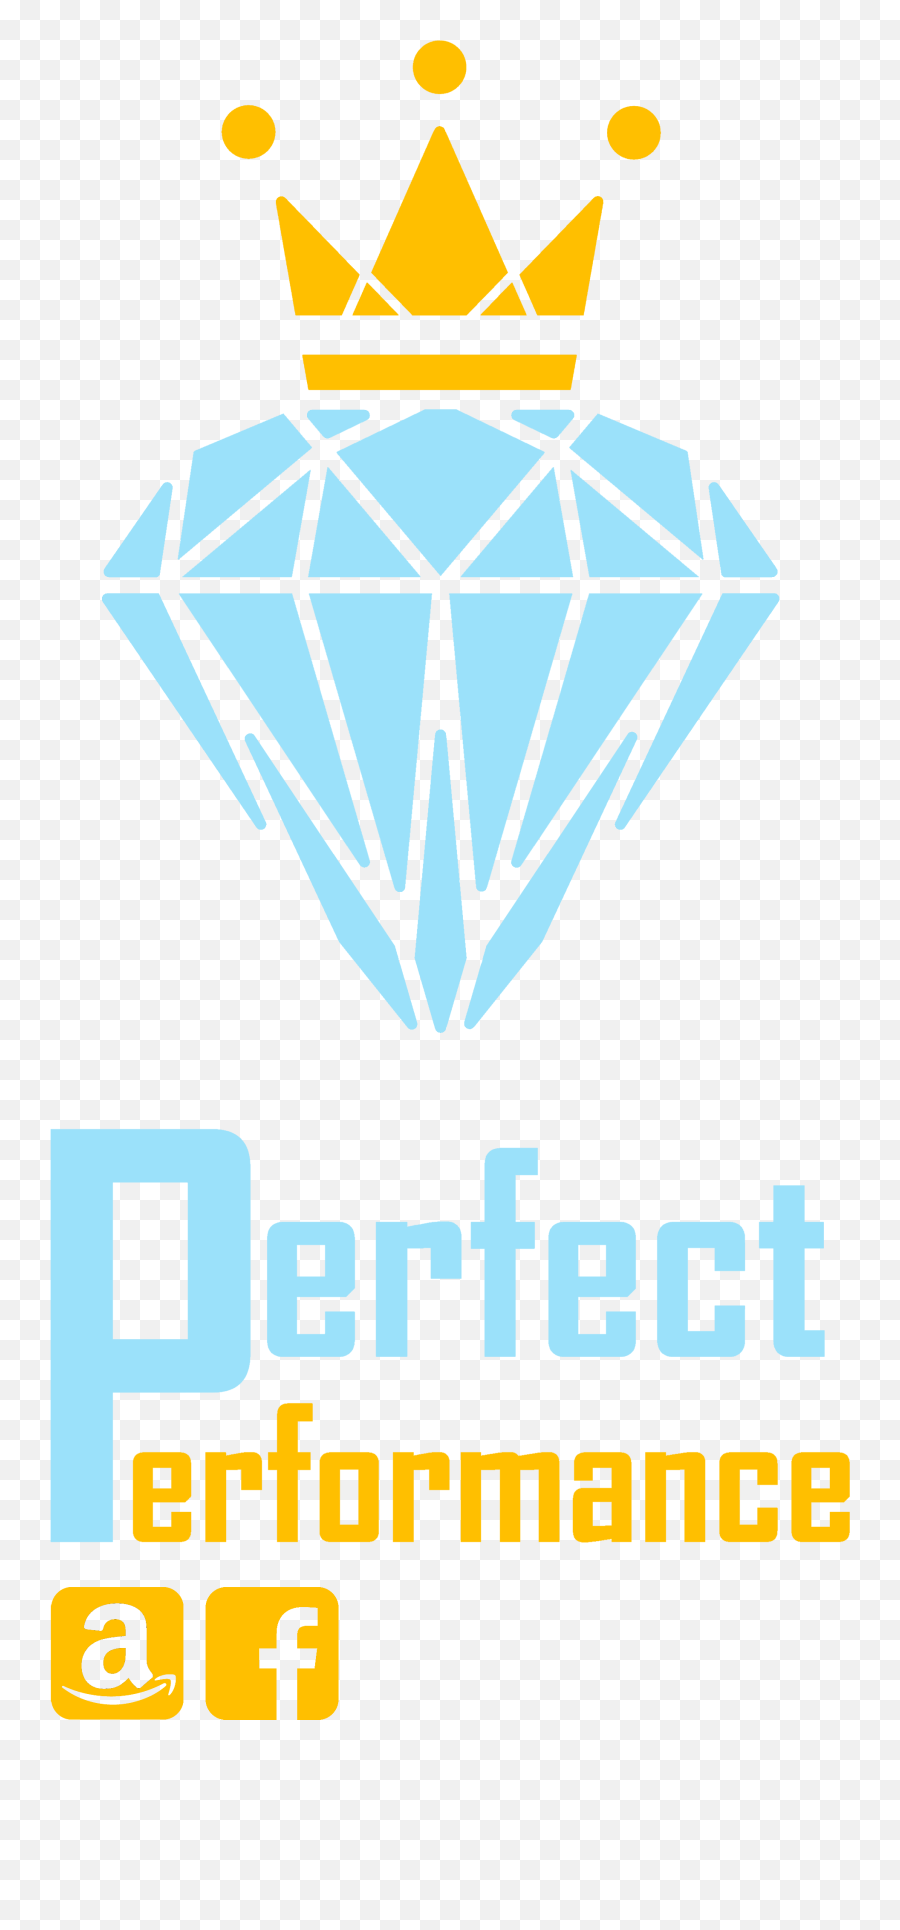 Convert This Png To A Vector File - Dripping Diamond,Are Png Files Vector